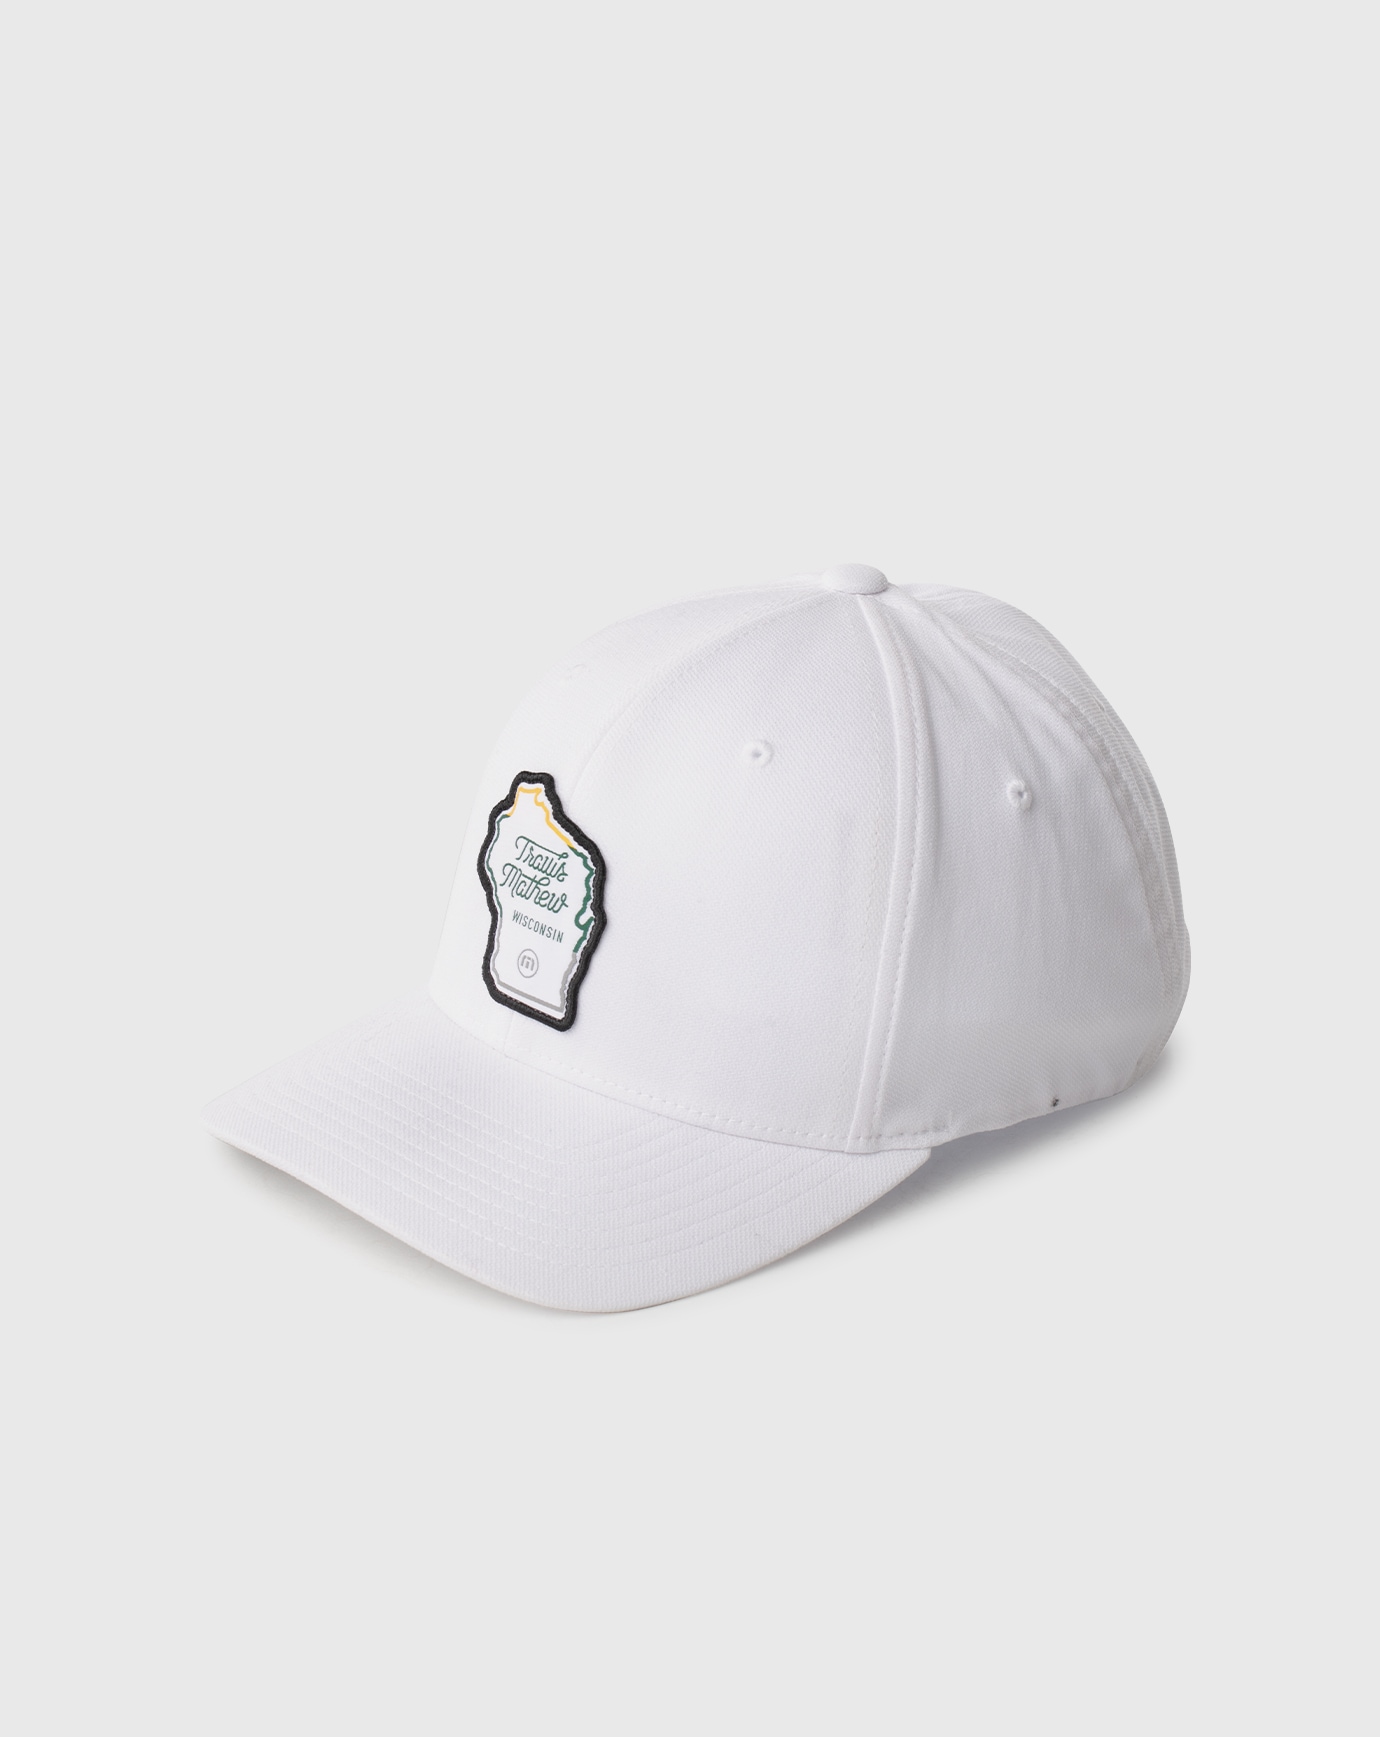 PAVILION FITTED HAT Image Thumbnail 2